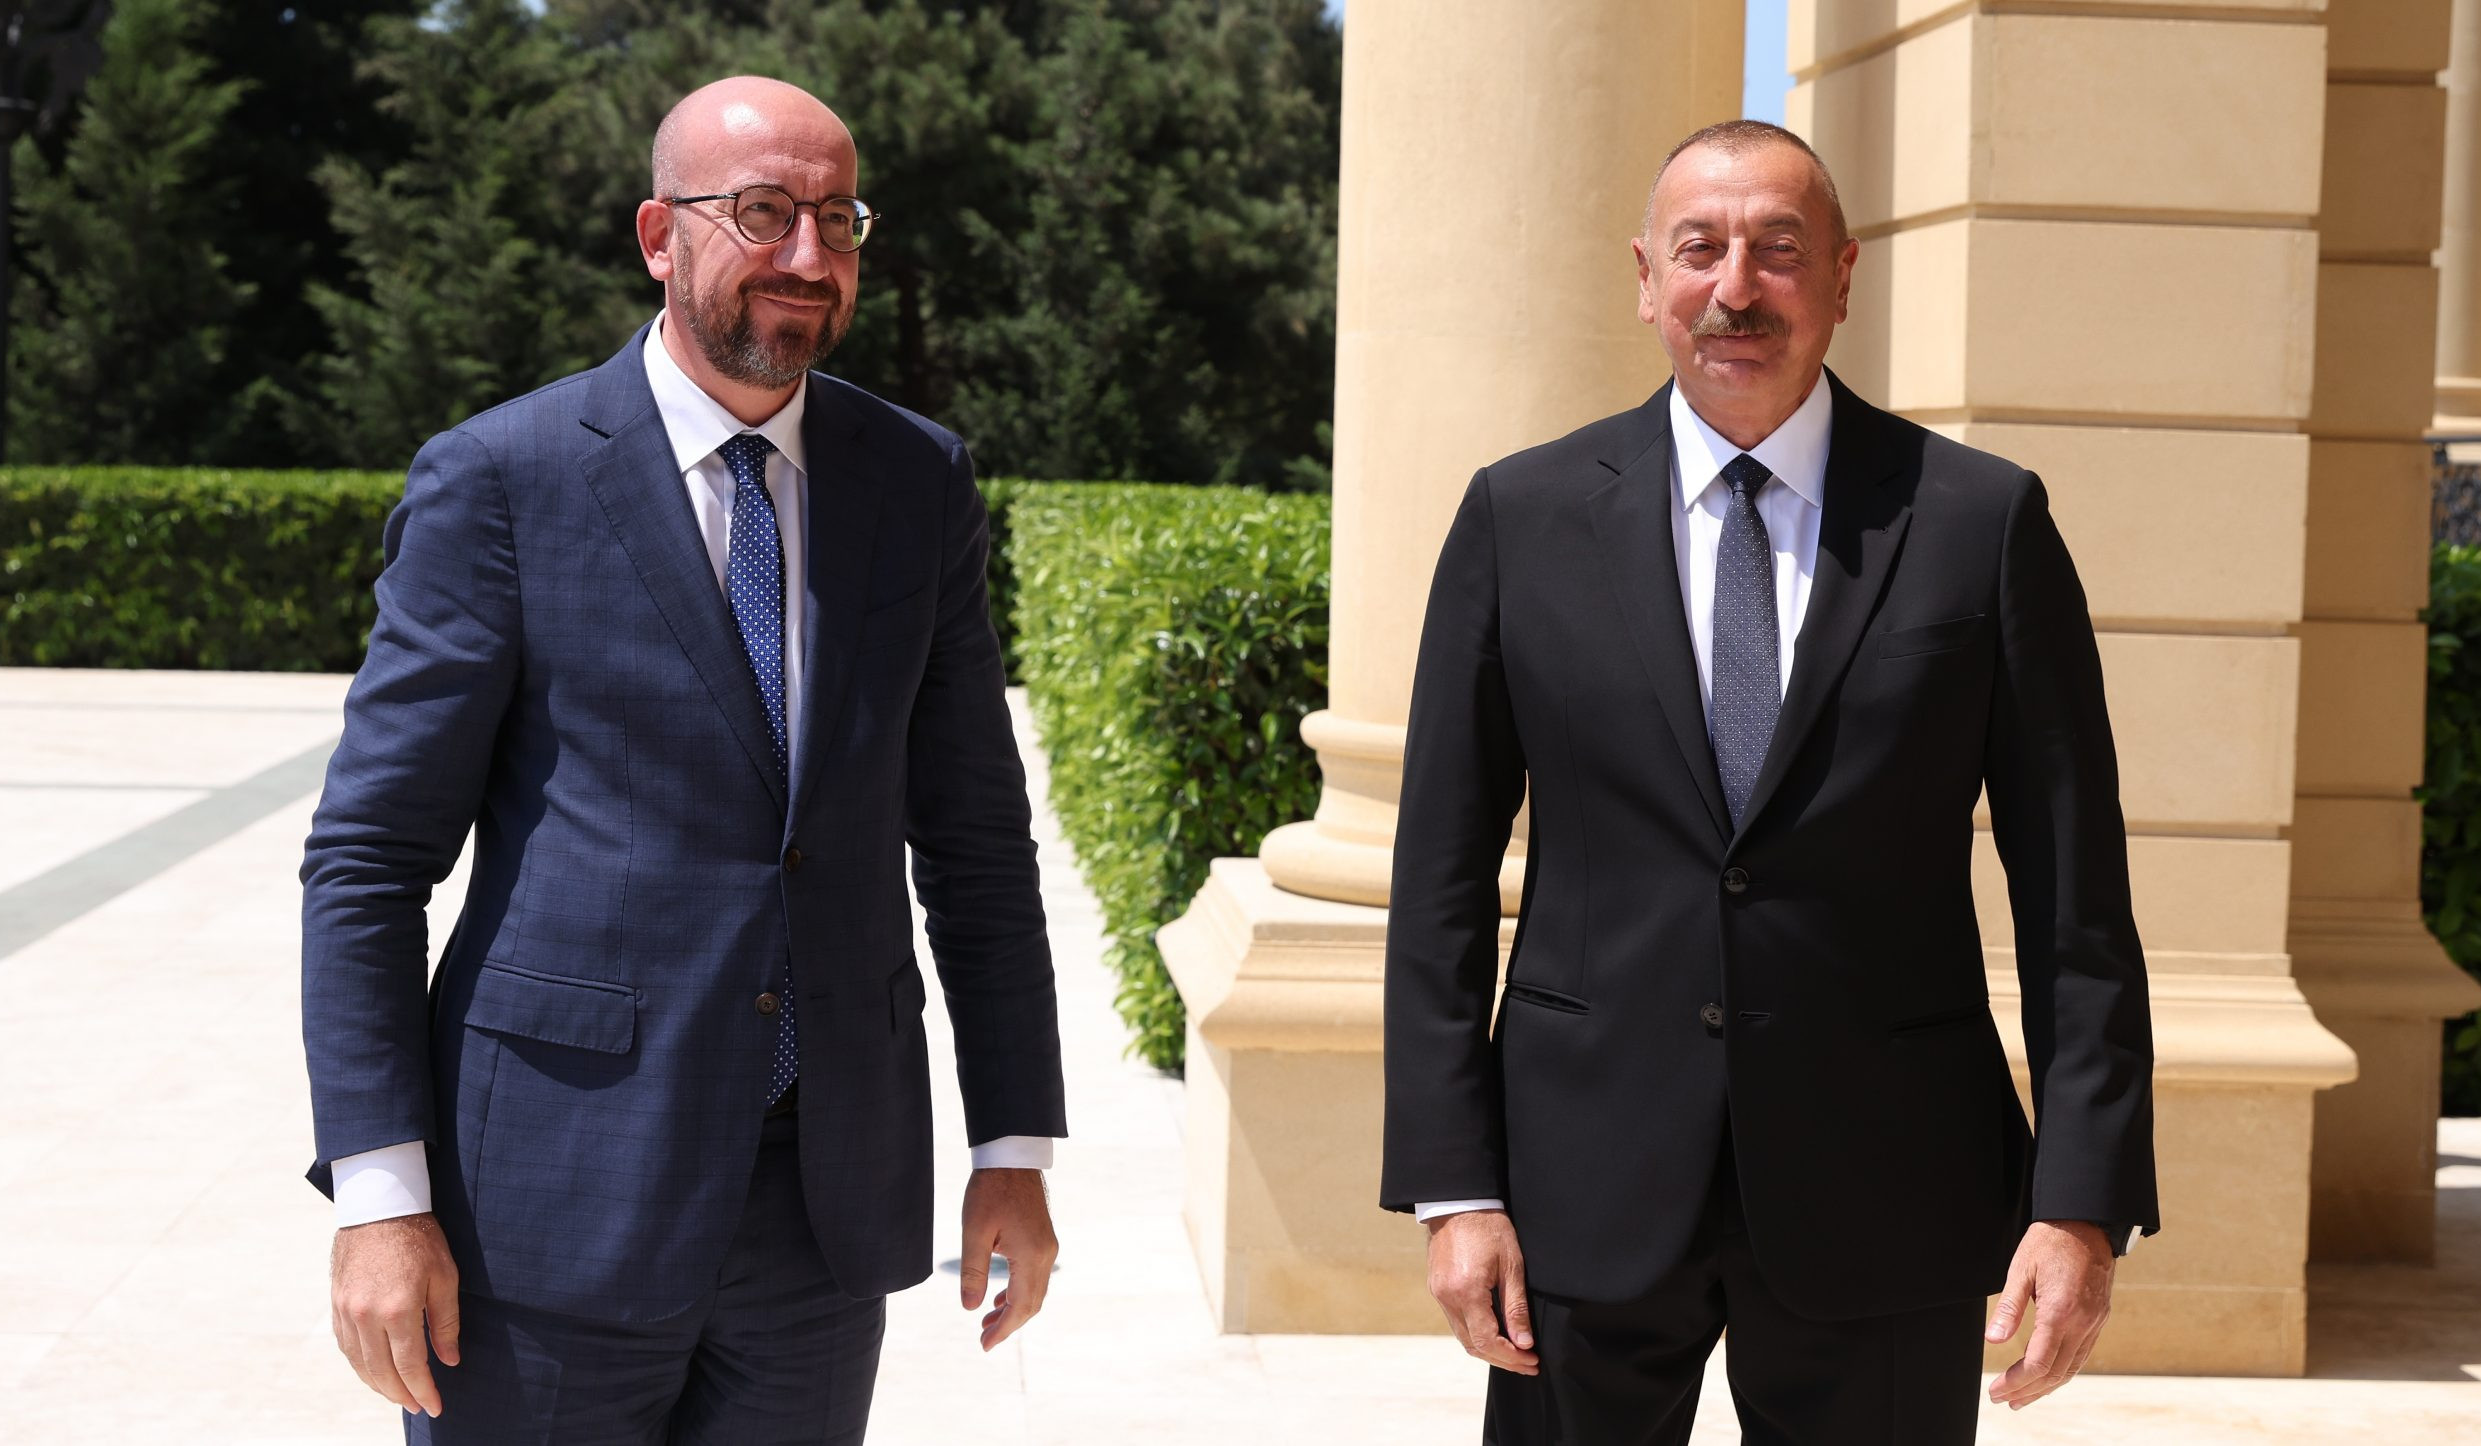 Michel and Aliyev discussed issue of relations between Armenia and Azerbaijan